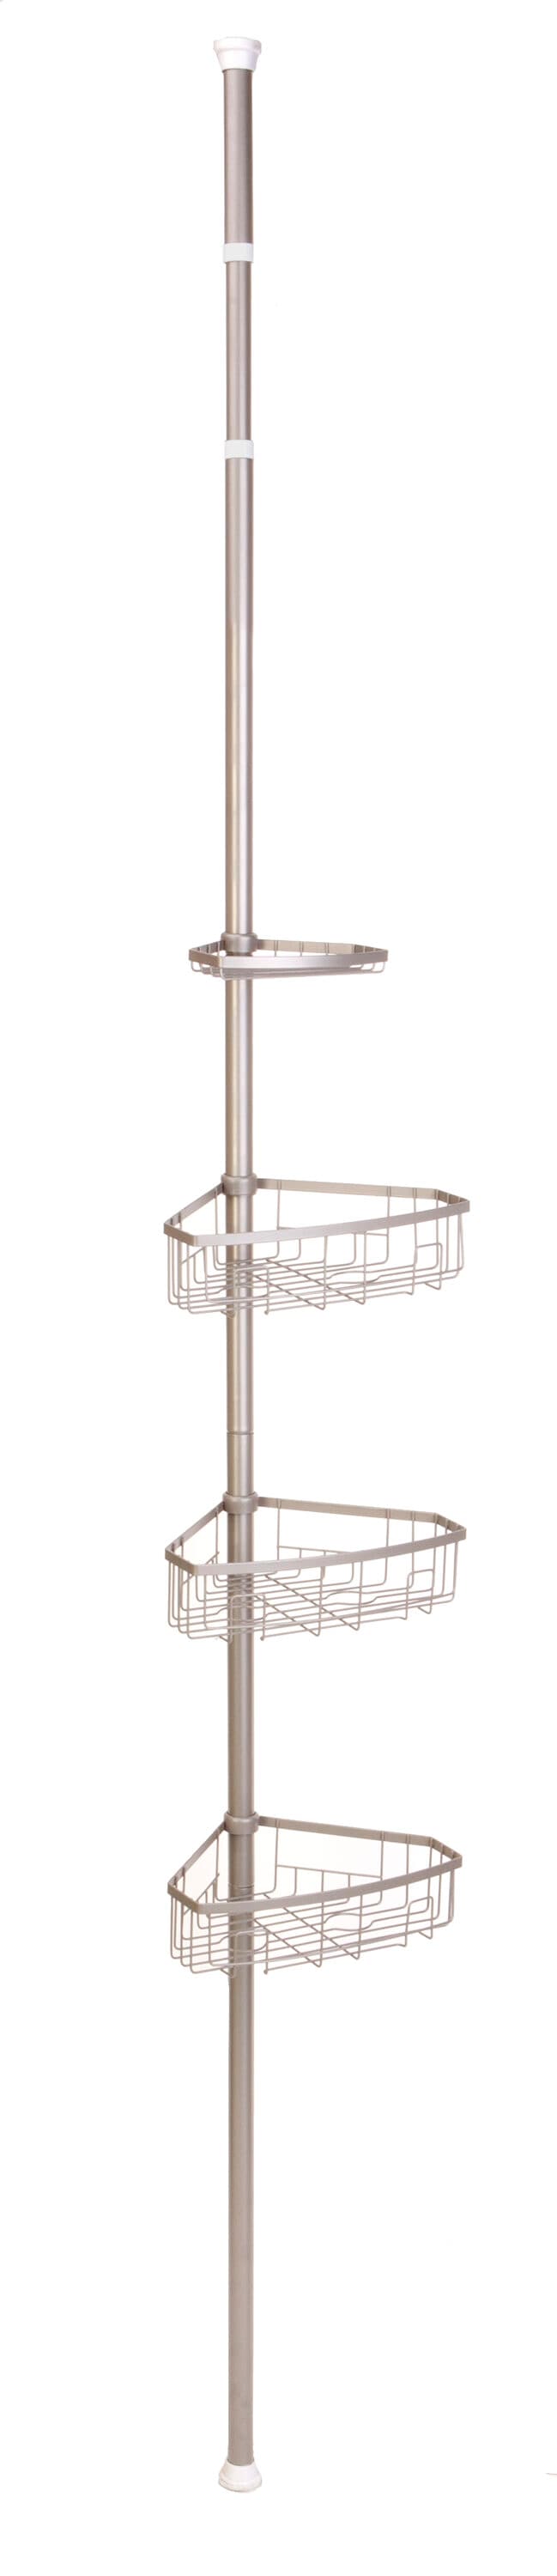 Satin Nickel Steel 4-Shelf Tension Pole Freestanding Shower Caddy 10.5-in x 8.5-in Rubber | - Style Selections 41451L